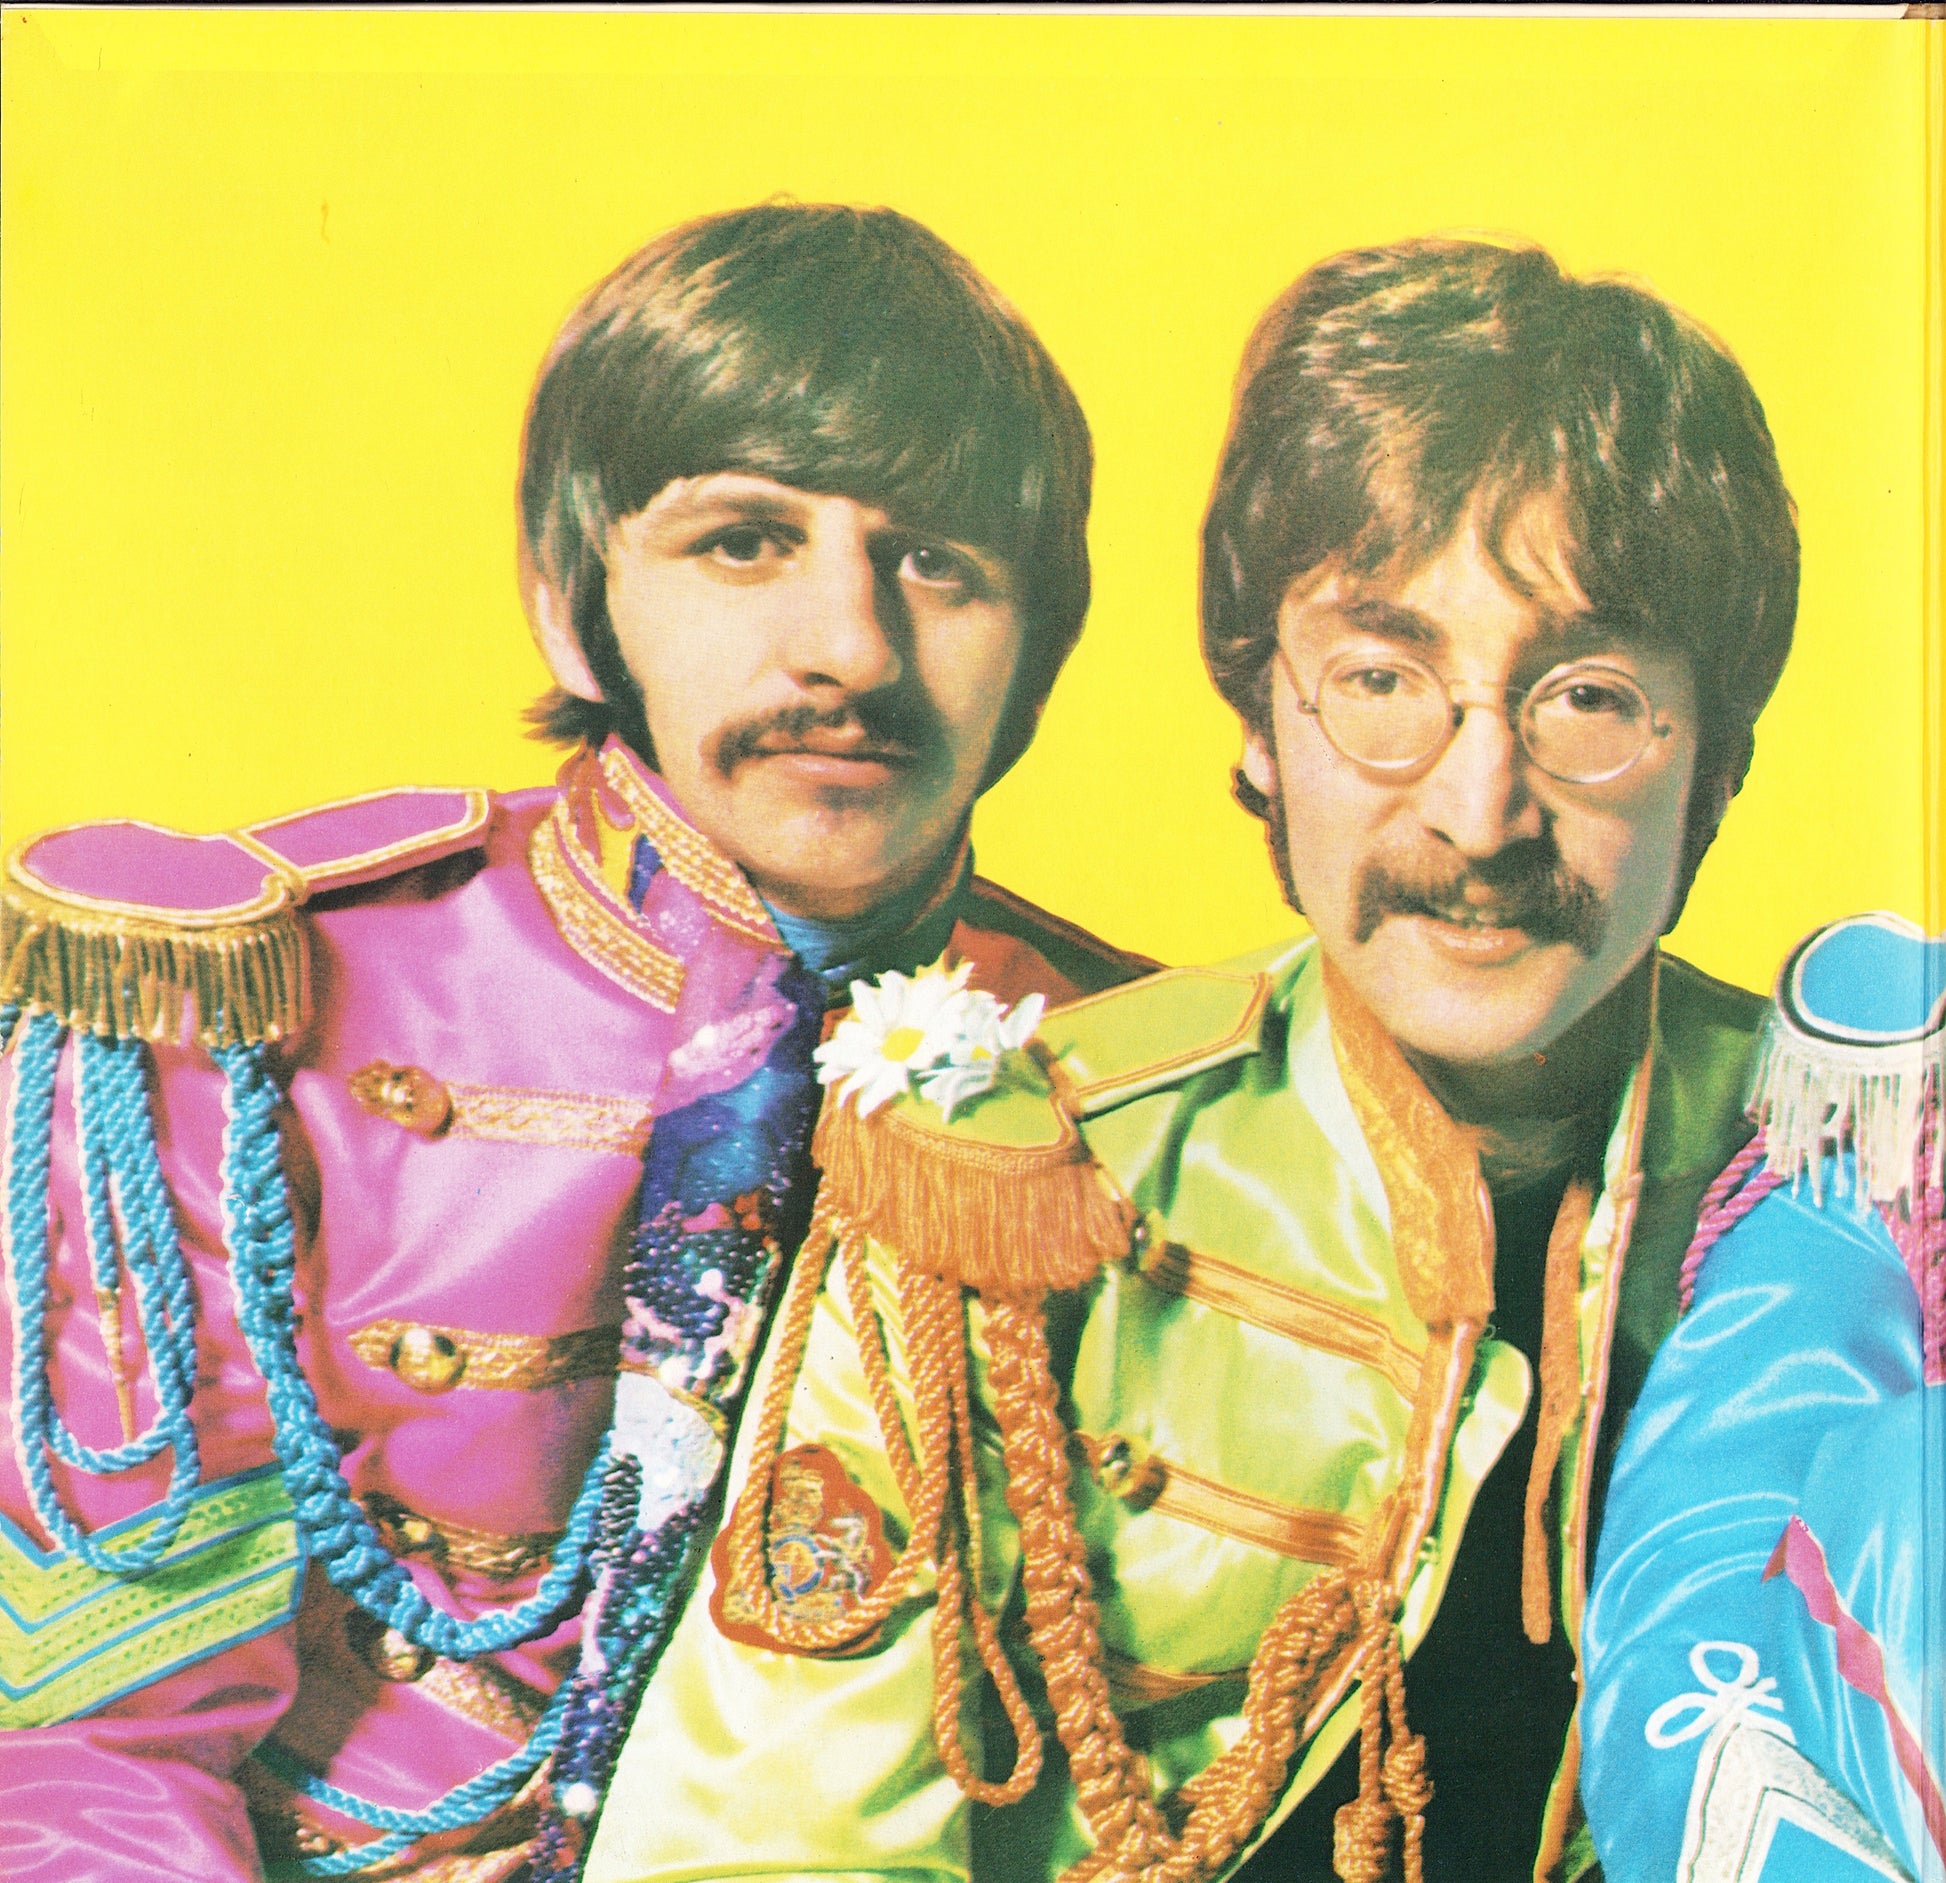 The Beatles ‎- Sgt. Pepper's Lonely Hearts Club Band Vinyl LP IT